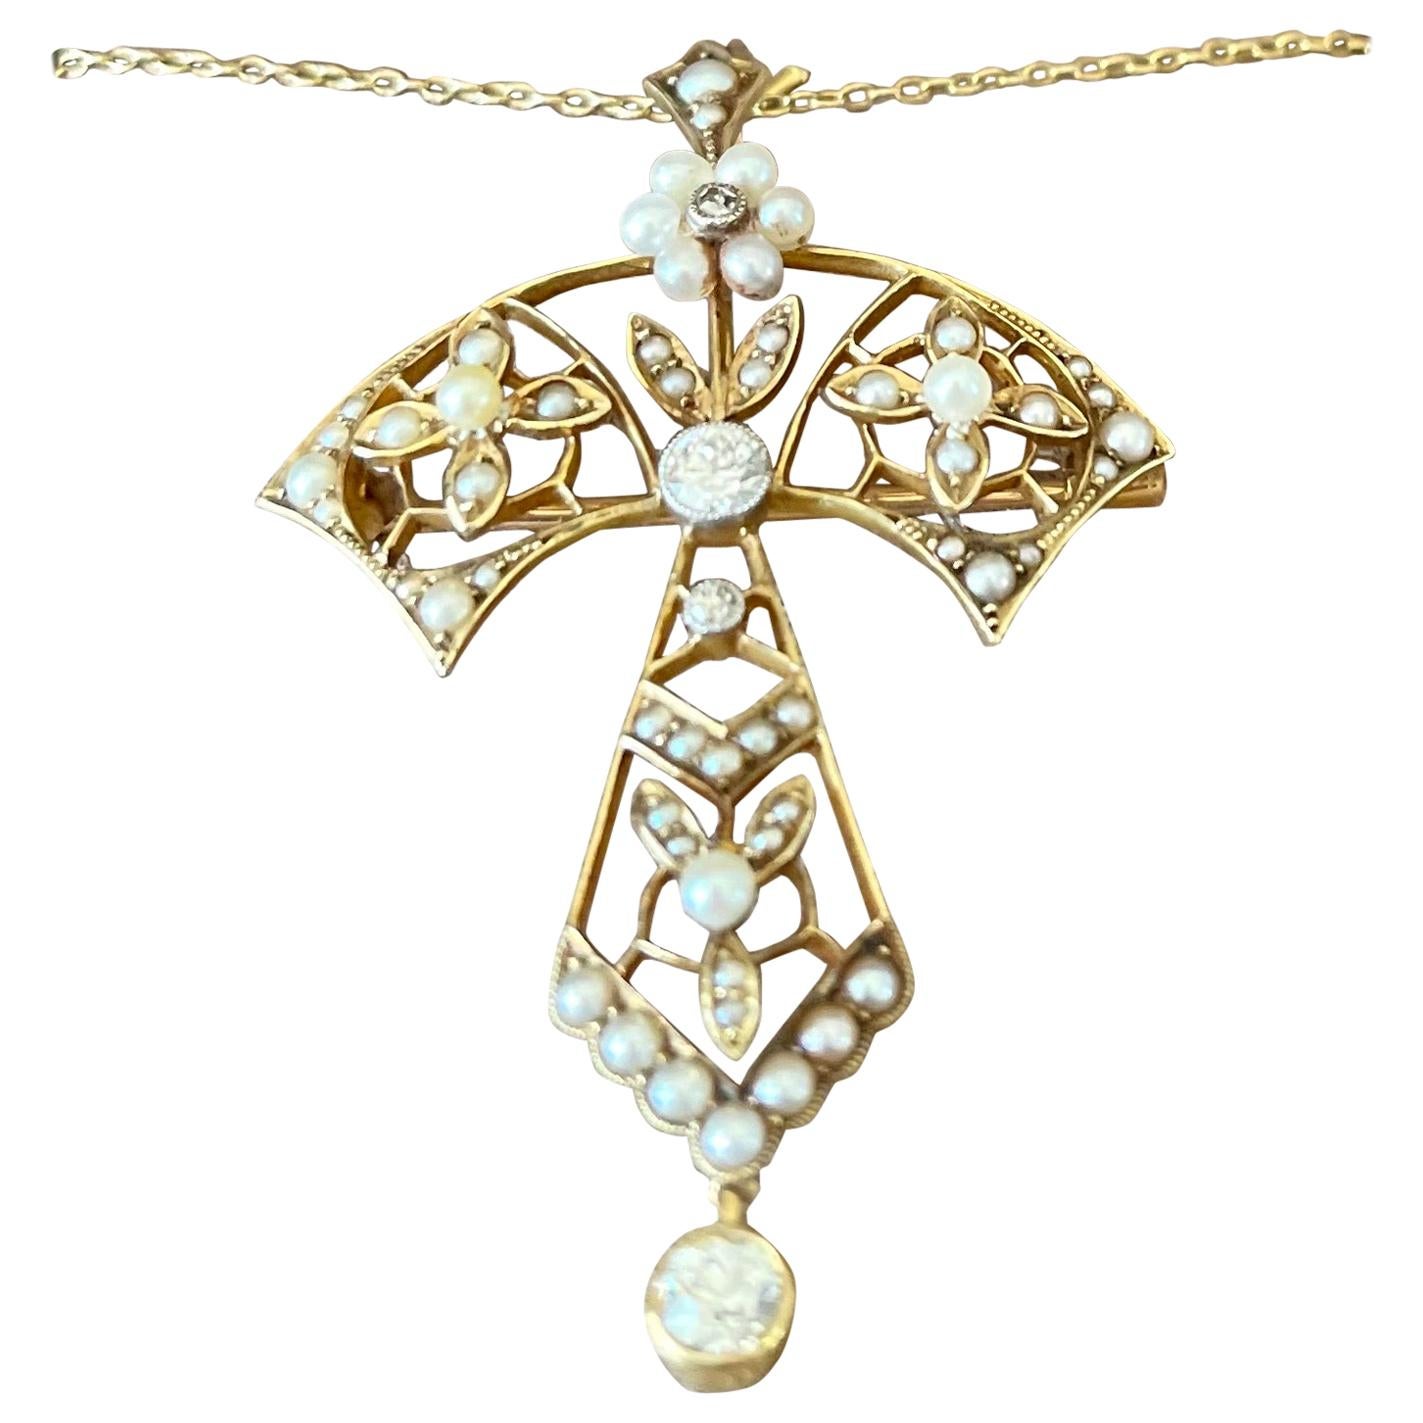 Antique Art Nouveau Diamond Pearl Pendant/Brooch with Chain 15 K Yellow Gold